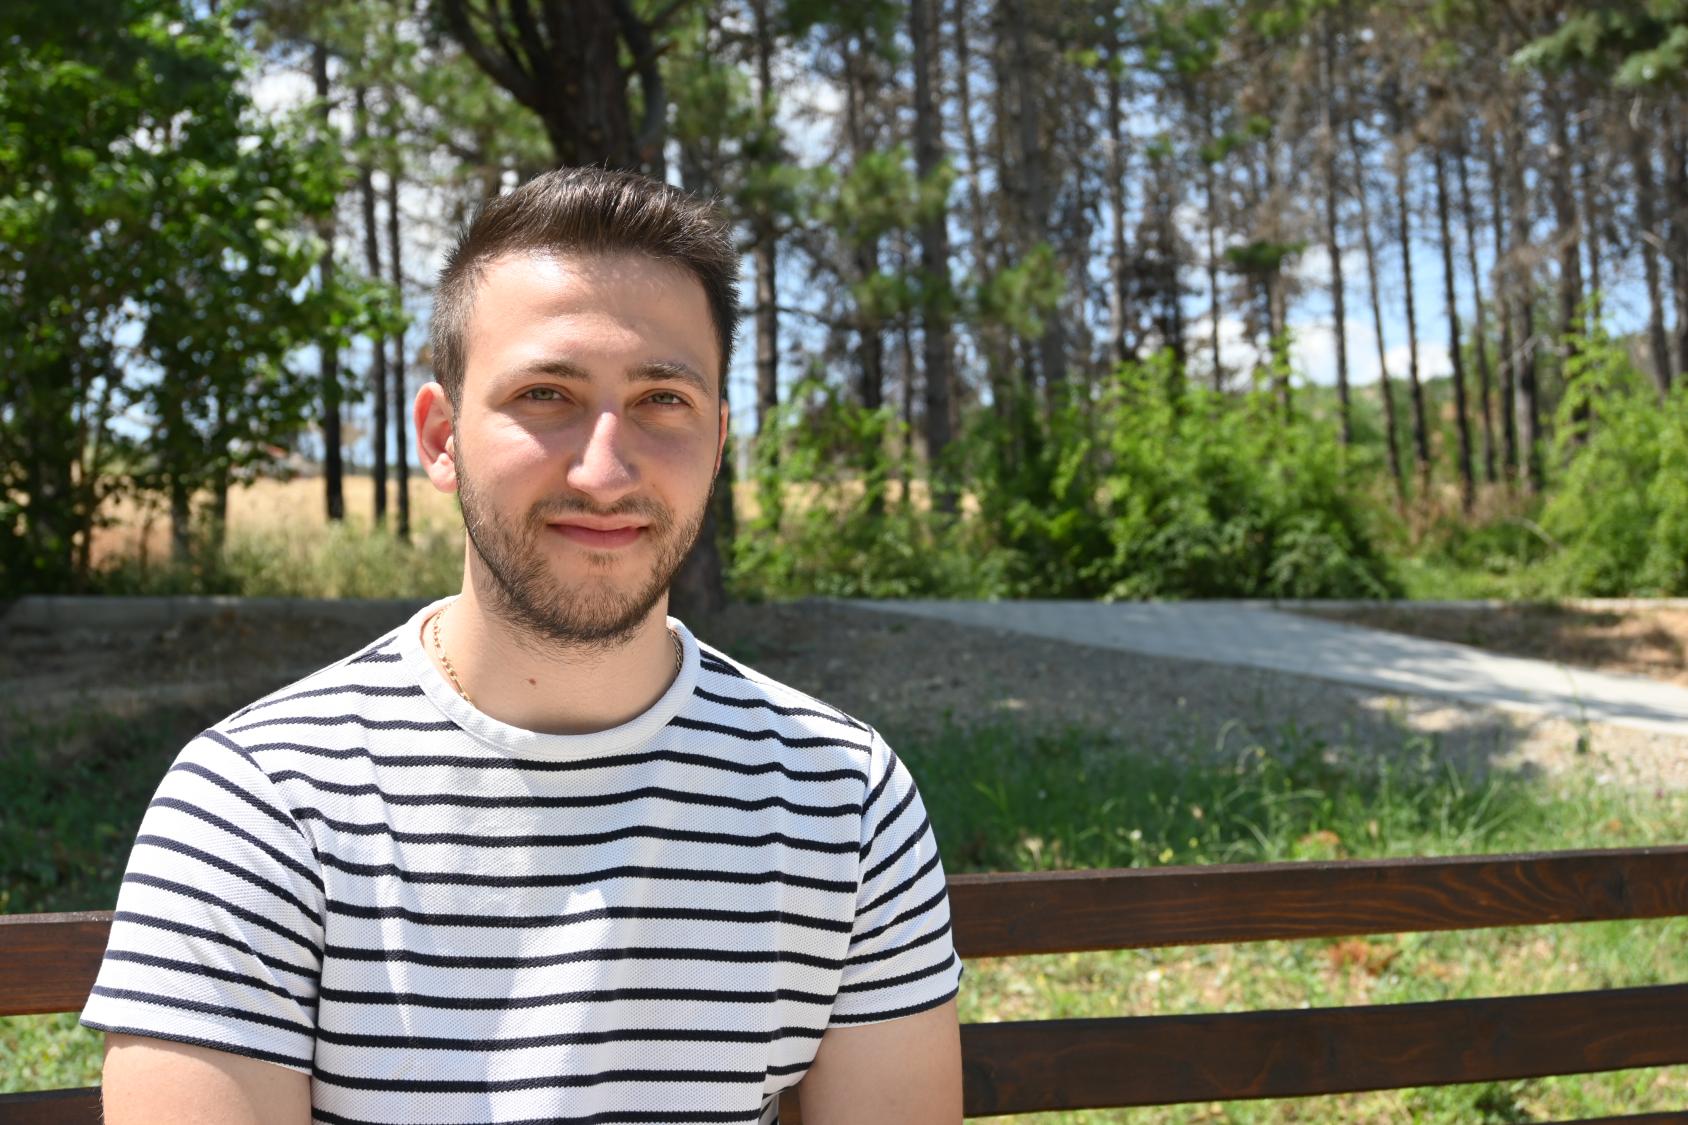 Aleksandar Miloshevikj, who is in charge of Y-Peer North Macedonia is shown positioned on the left of the photo sitting on a park bench.